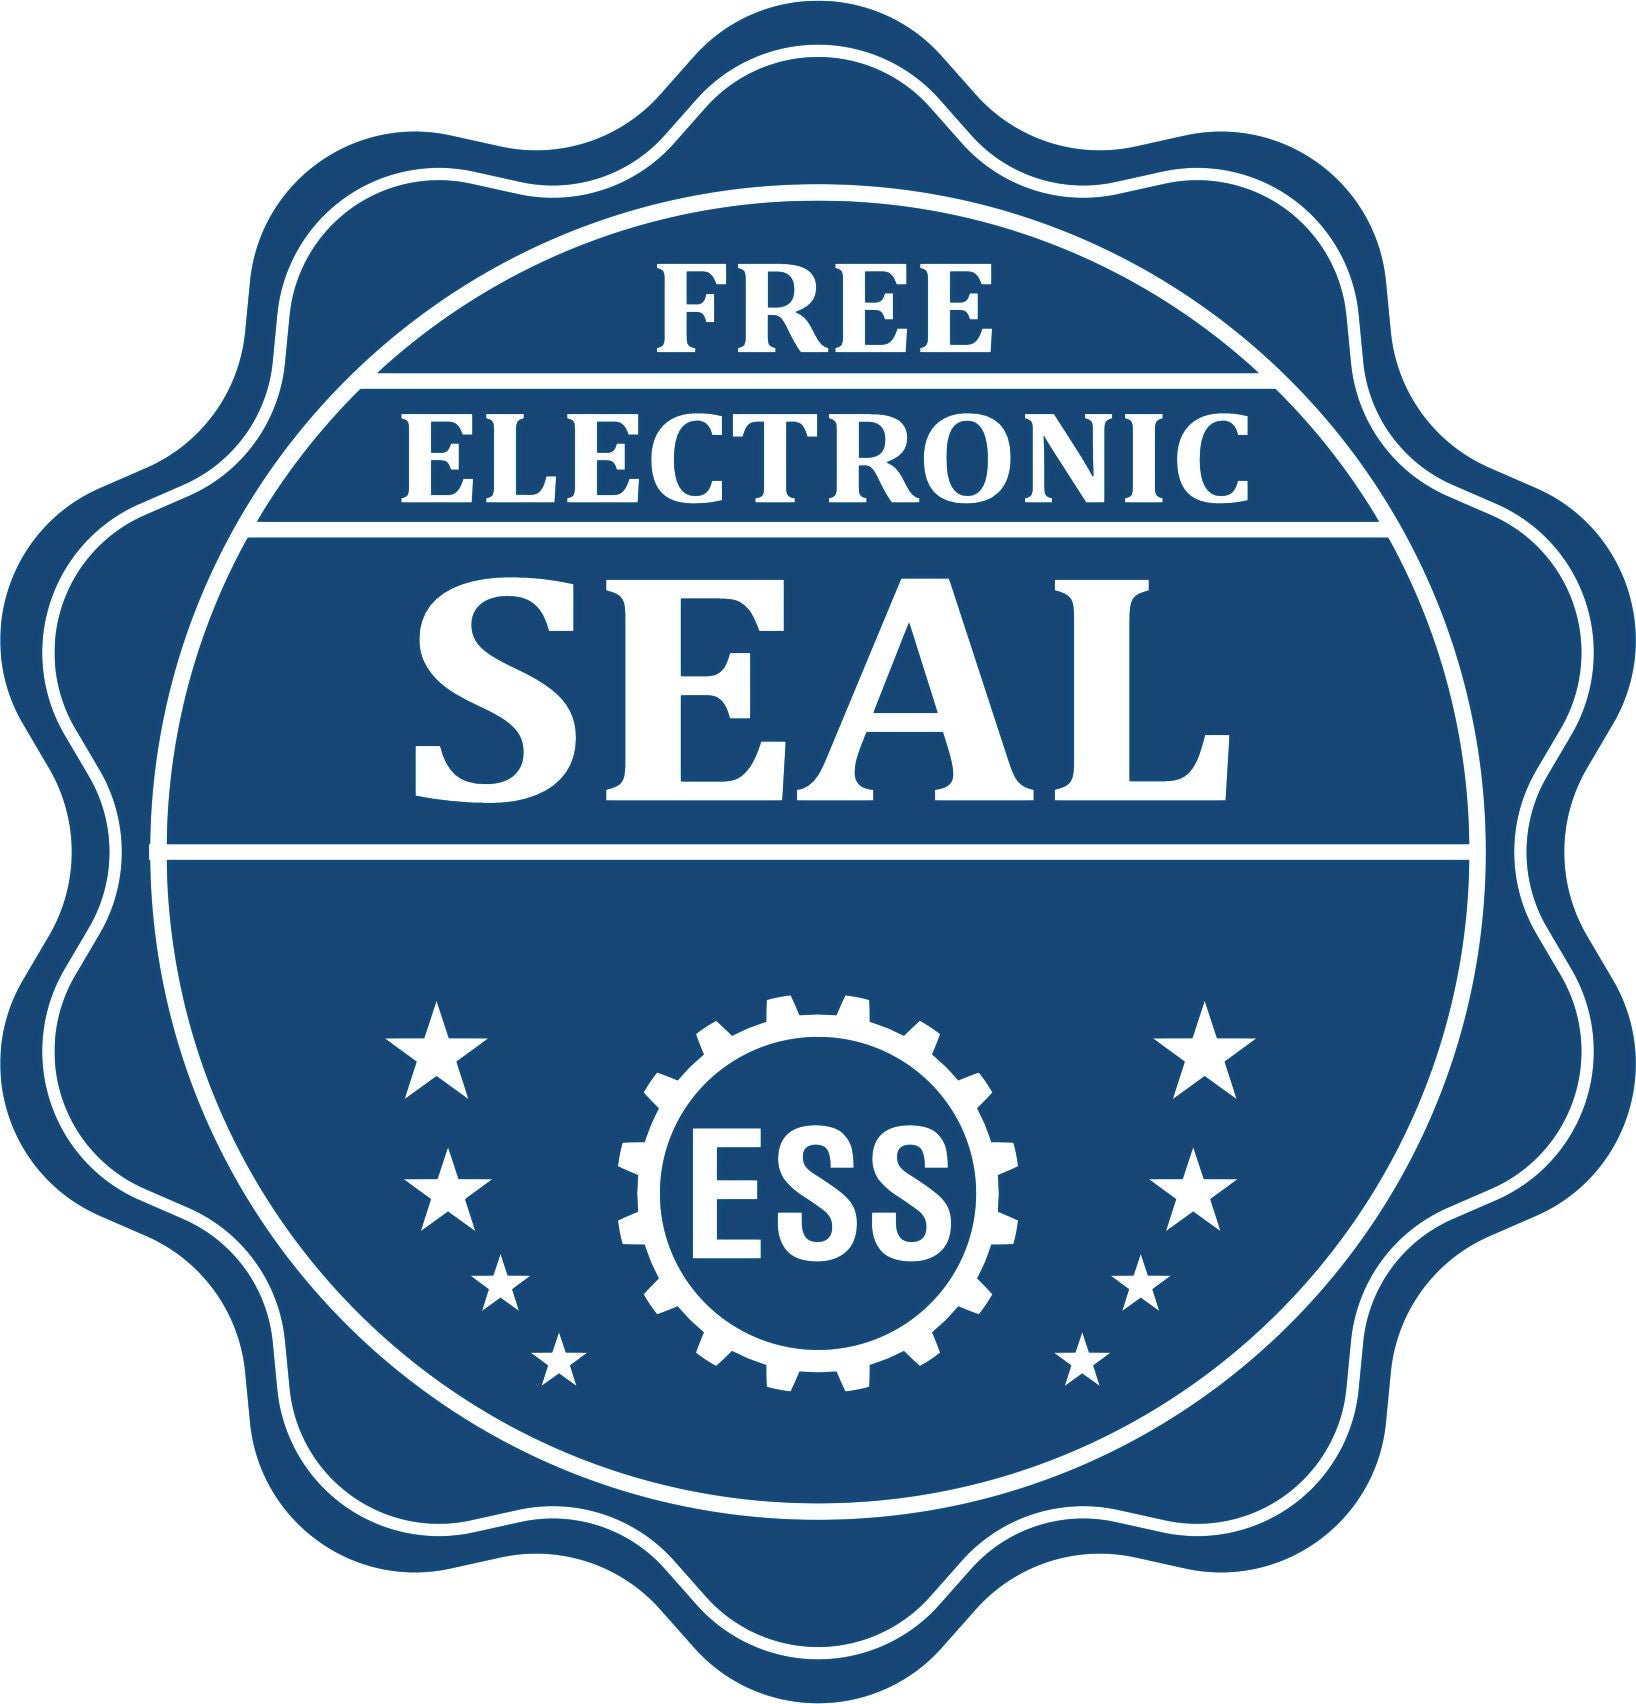 A badge showing a free electronic seal for the Handheld Nebraska Professional Geologist Embosser with stars and the ESS gear on the emblem.